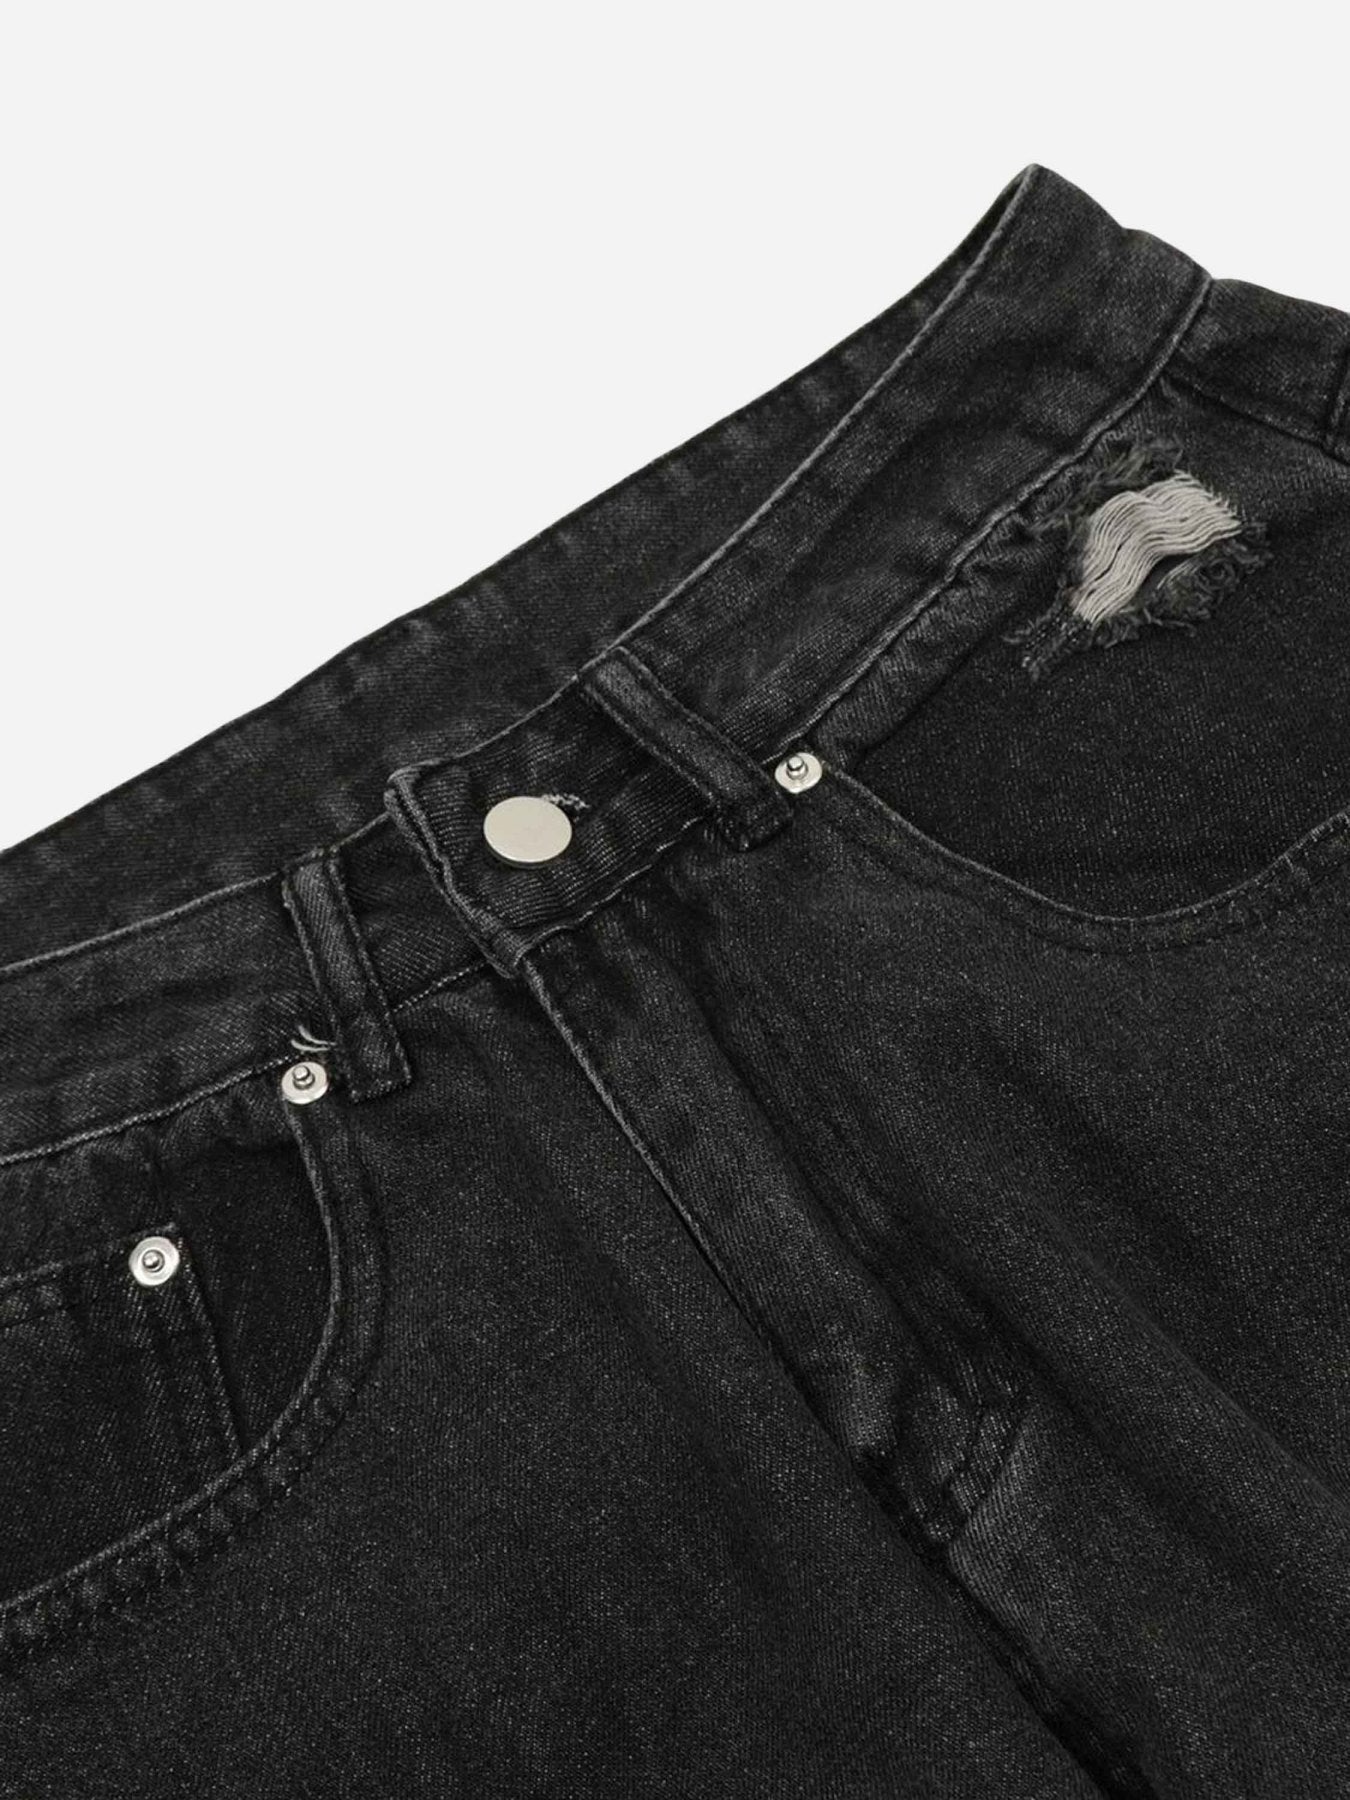 Thesupermade Washed Multi-pocket Work Jeans - 1830